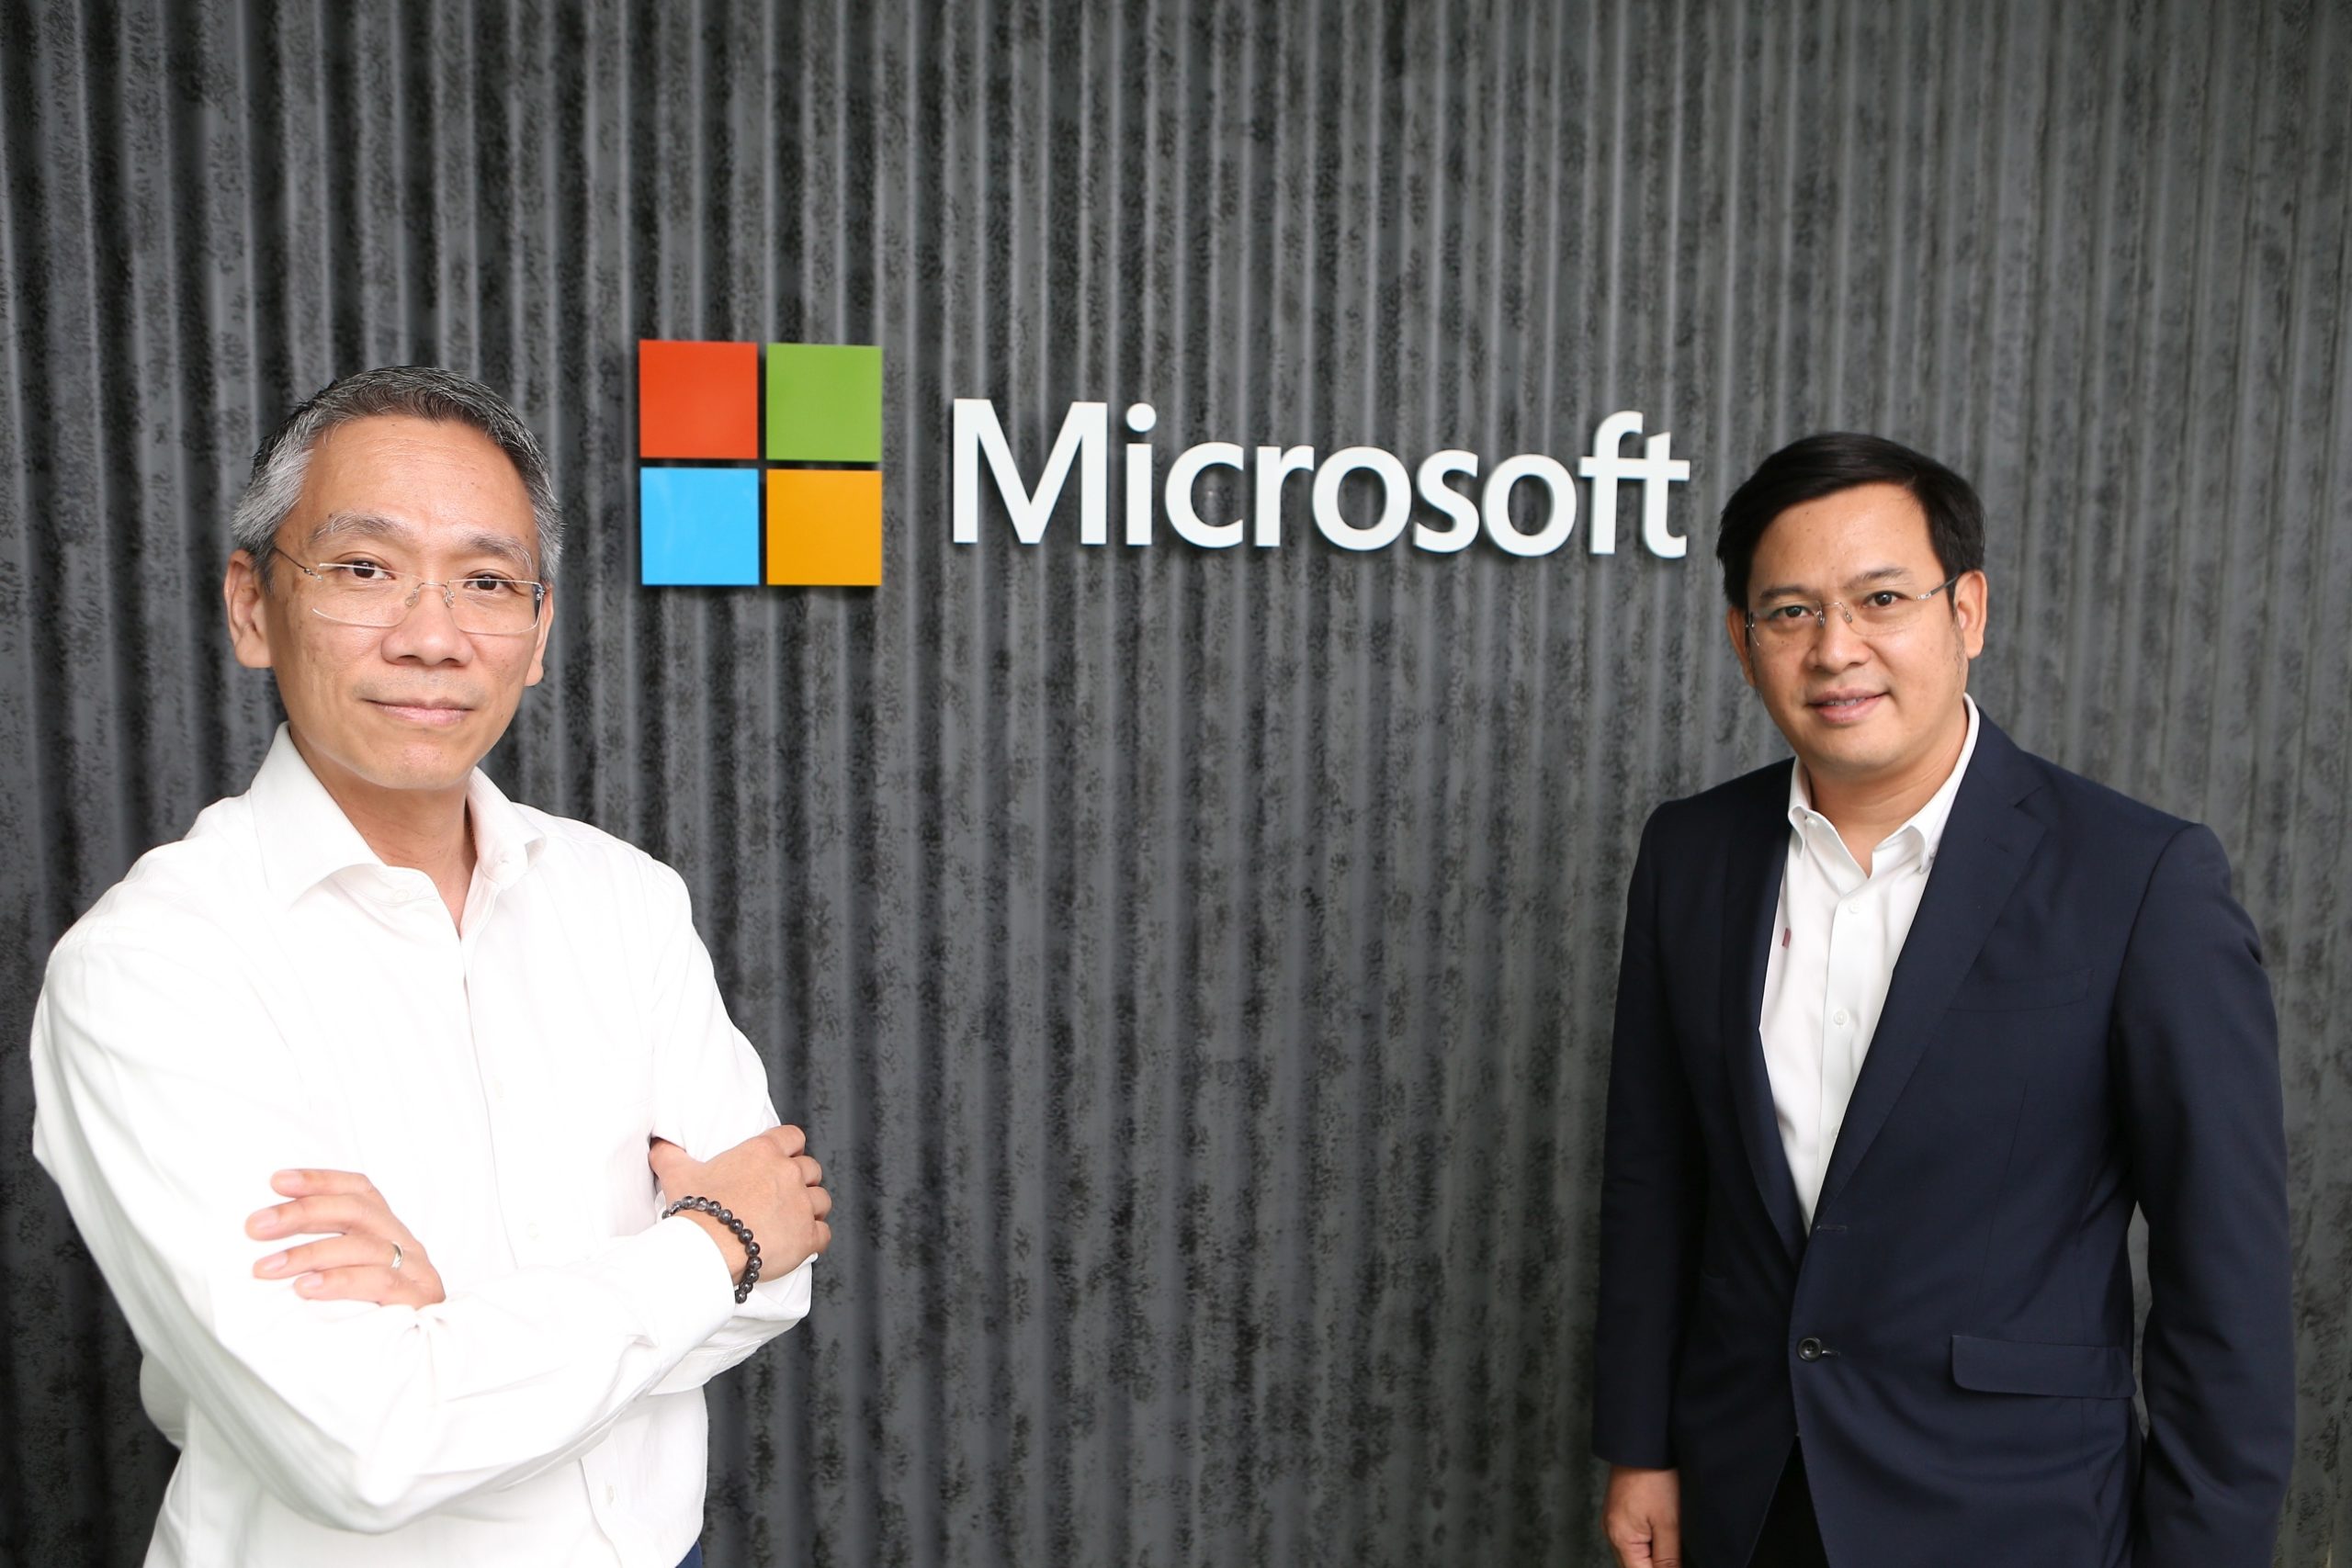 Man in white shirt and man in dark jacket in front of Microsoft logo